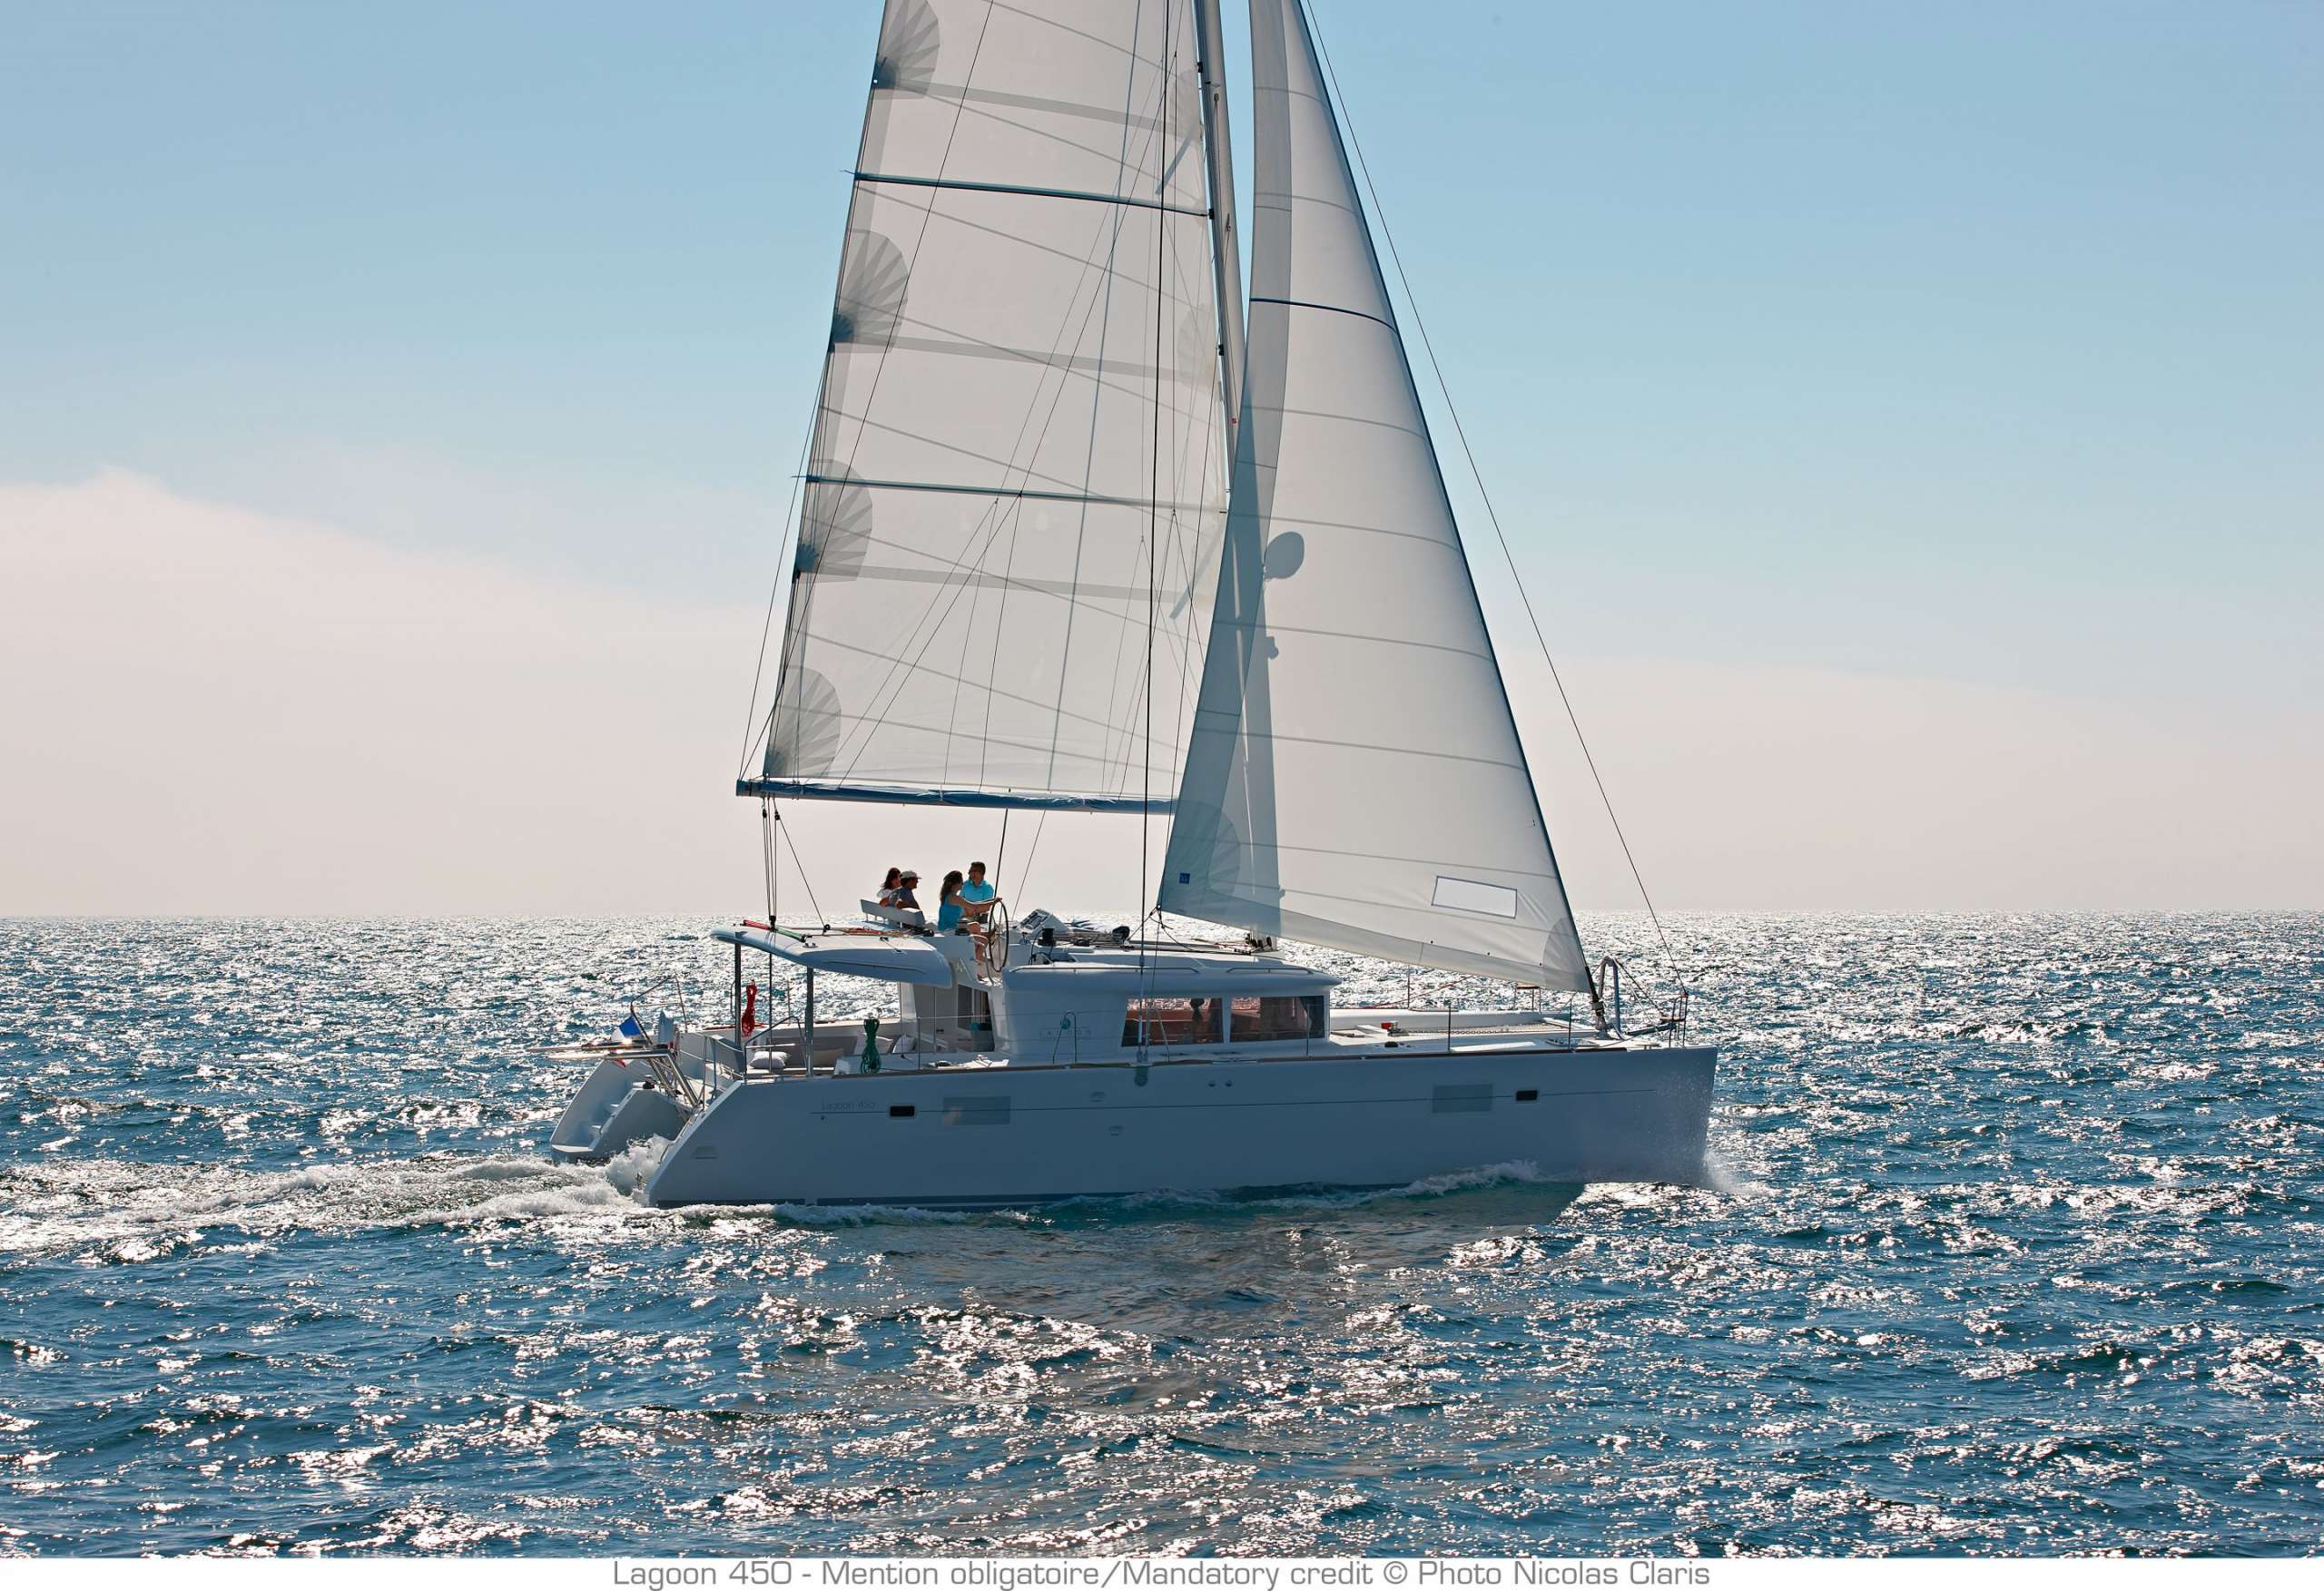 Rent a yacht with Avgerinos sailing, Lagoon 450F